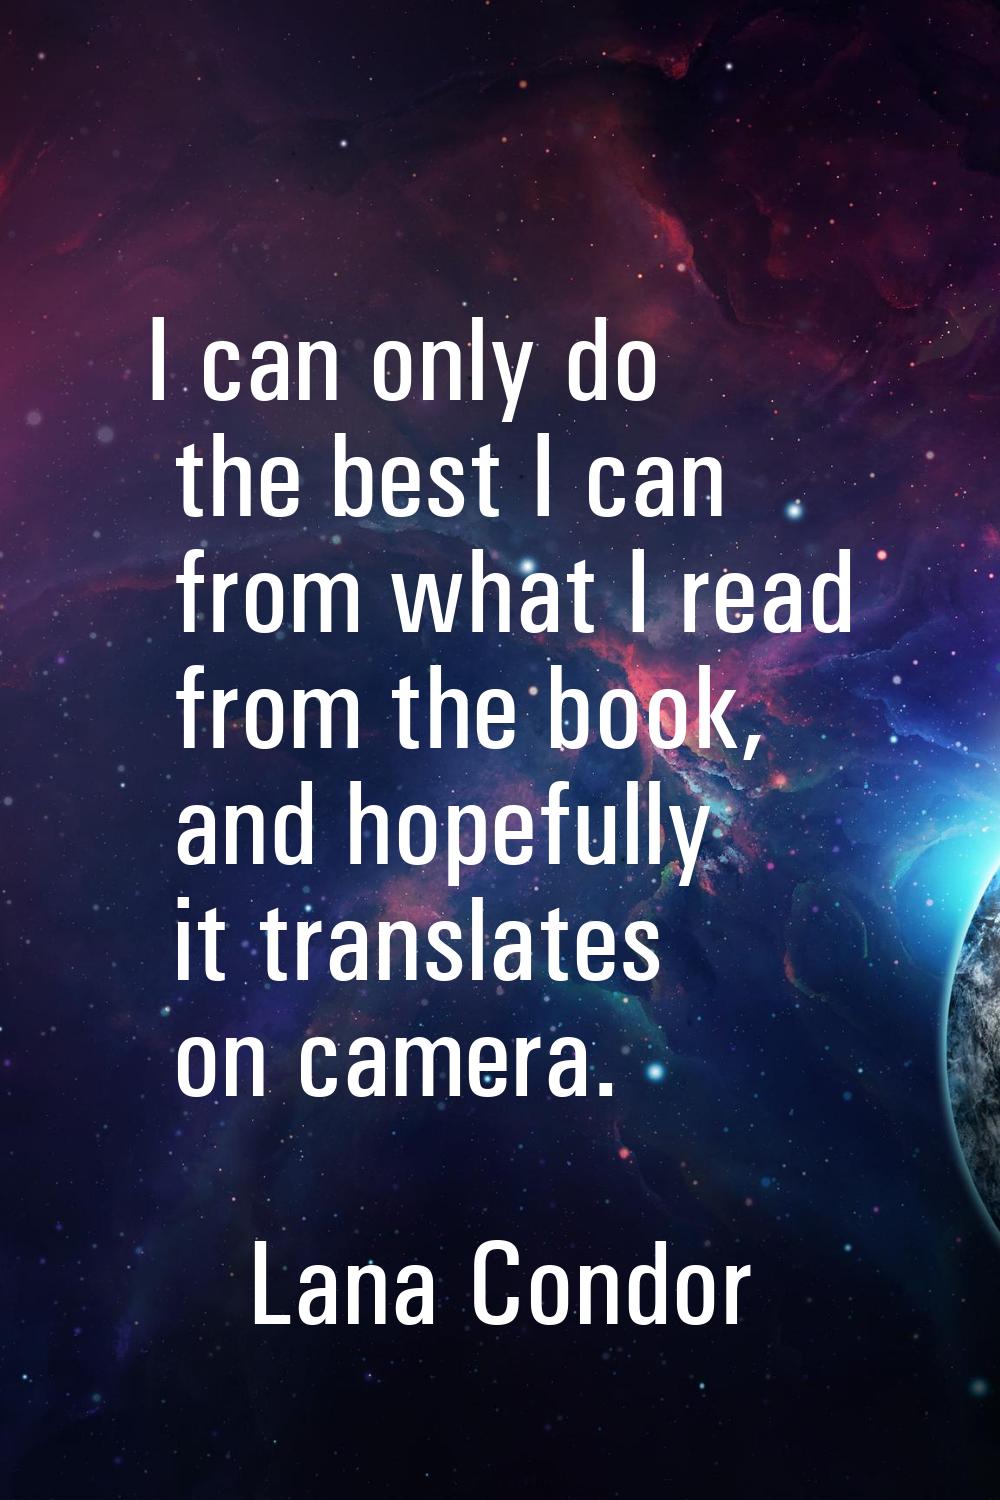 I can only do the best I can from what I read from the book, and hopefully it translates on camera.